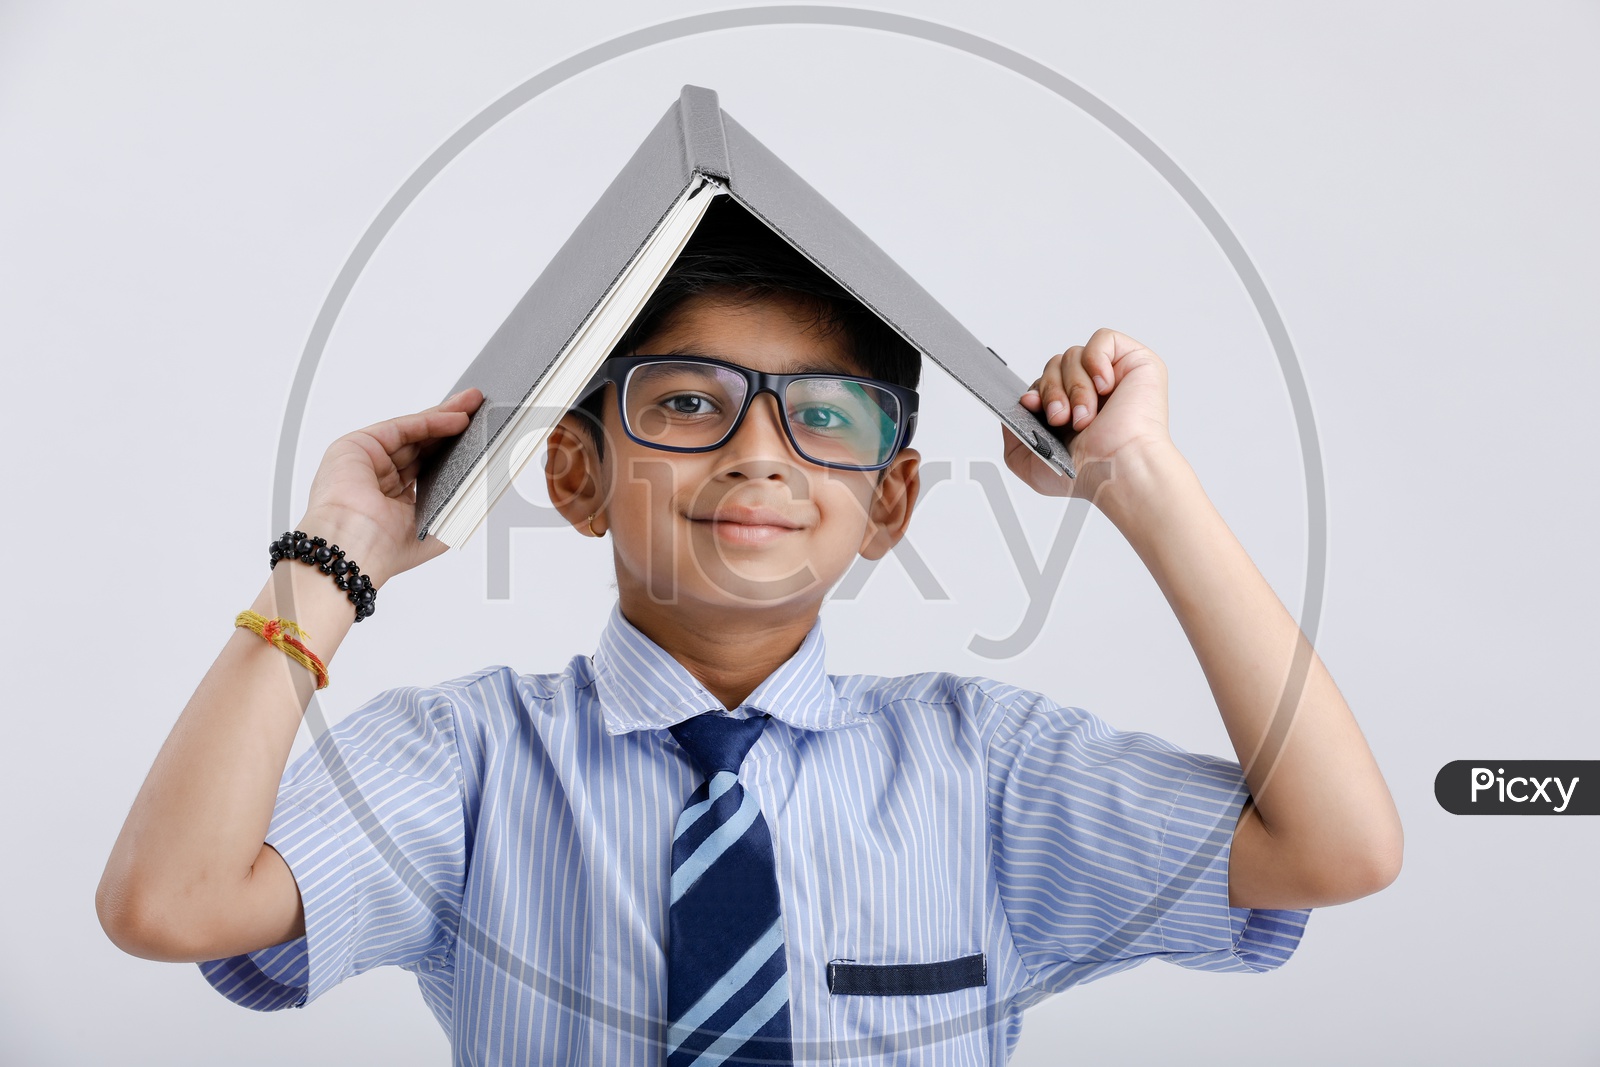 Indian Or Asian Boy Or Kid Or student in School Uniform  Wearing Spectacles And Book On Head Posing Over an Isolated White Background